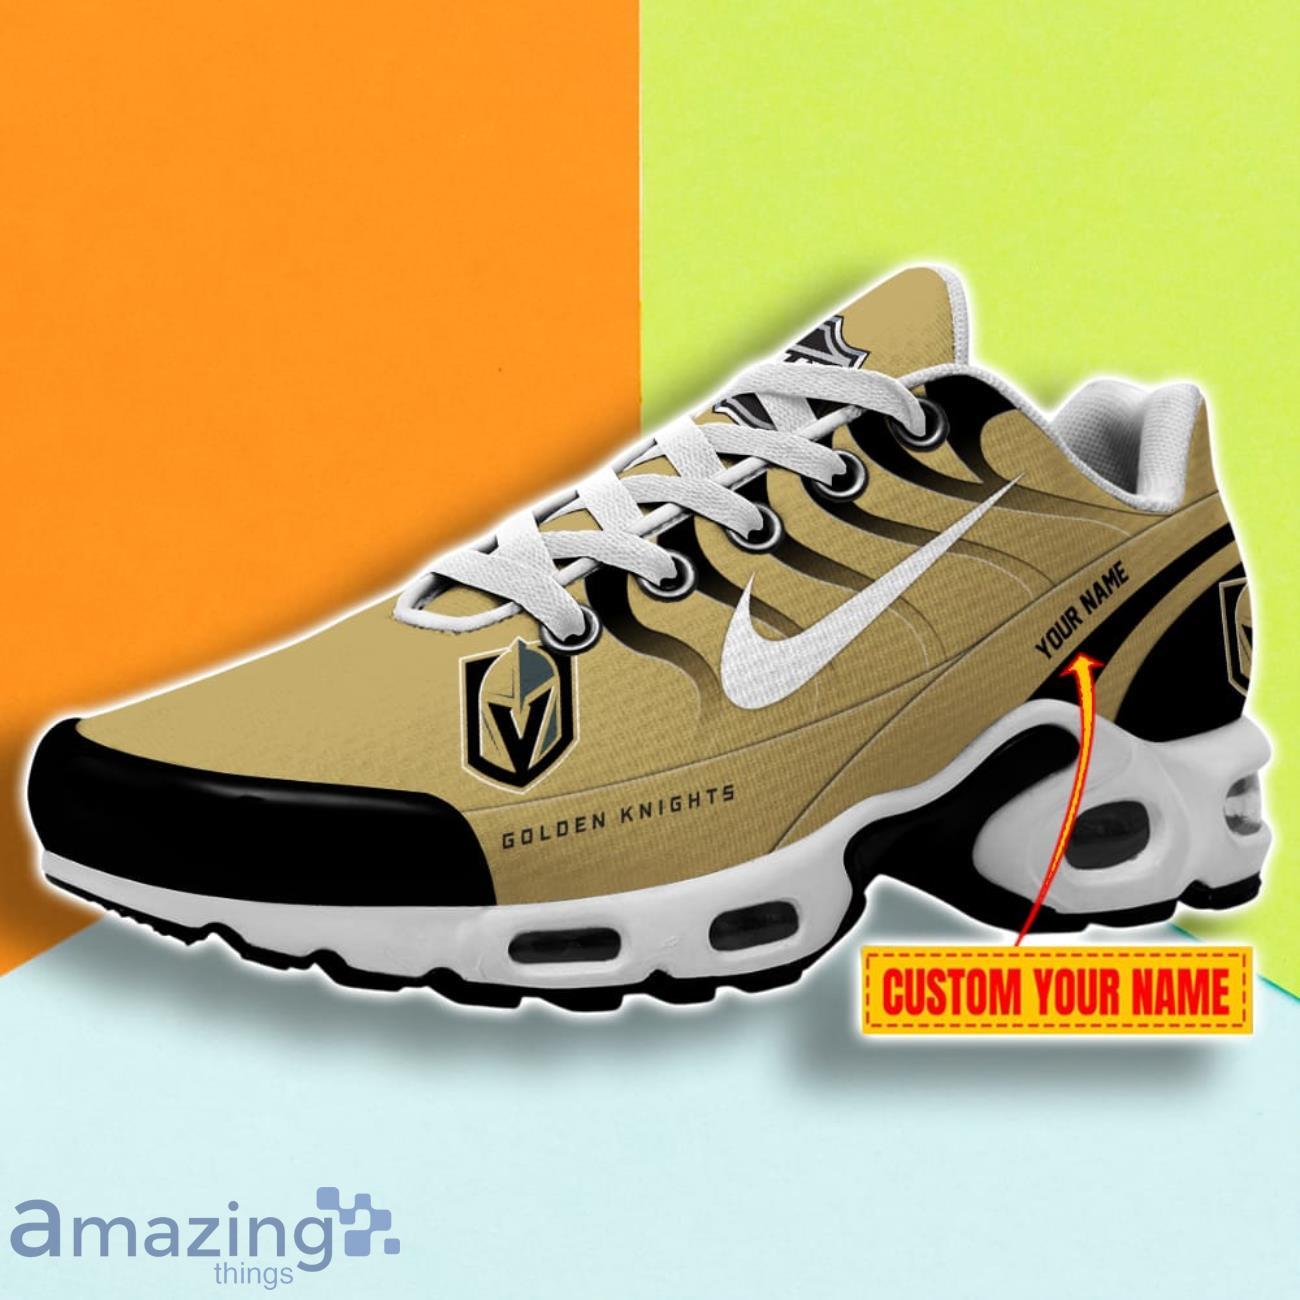 Vegas Golden Knights NHL TN Sport Shoes Custom Name Enthusiastic Support From Fans Product Photo 1